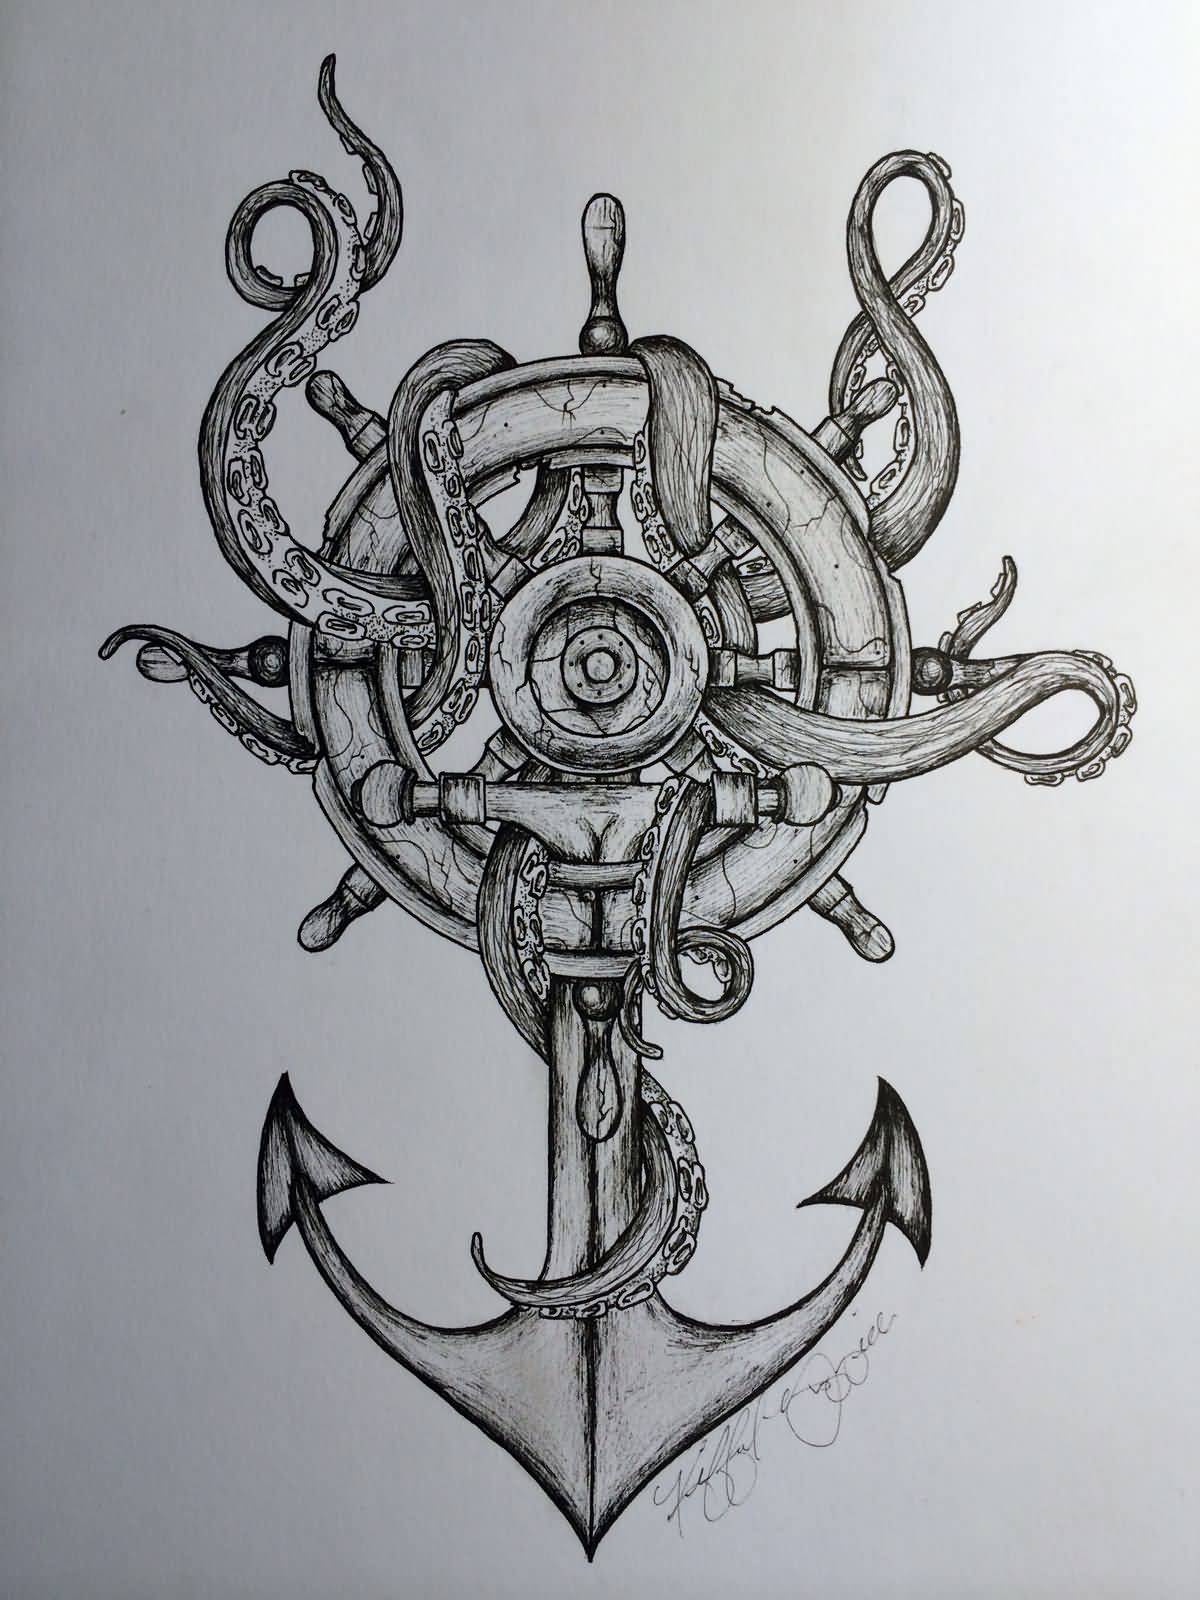 Black And Grey Octopus With Ship Wheel And Anchor Tattoo Design